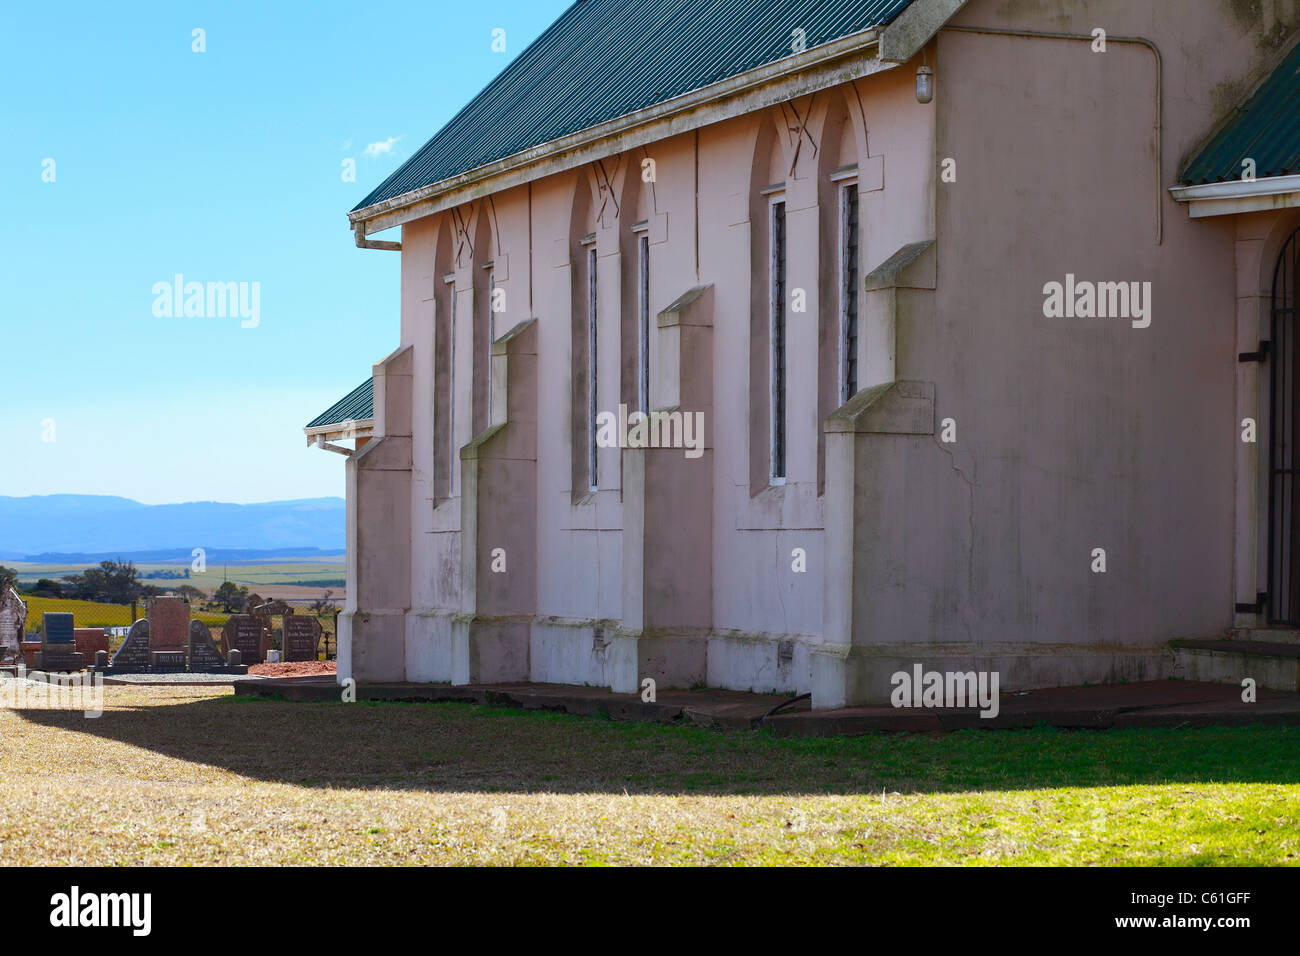 Chapel and graveyard in rural sugarcane fields in the Wartburg district of KwaZulu Natal, South Africa. Foreground focus. Stock Photo